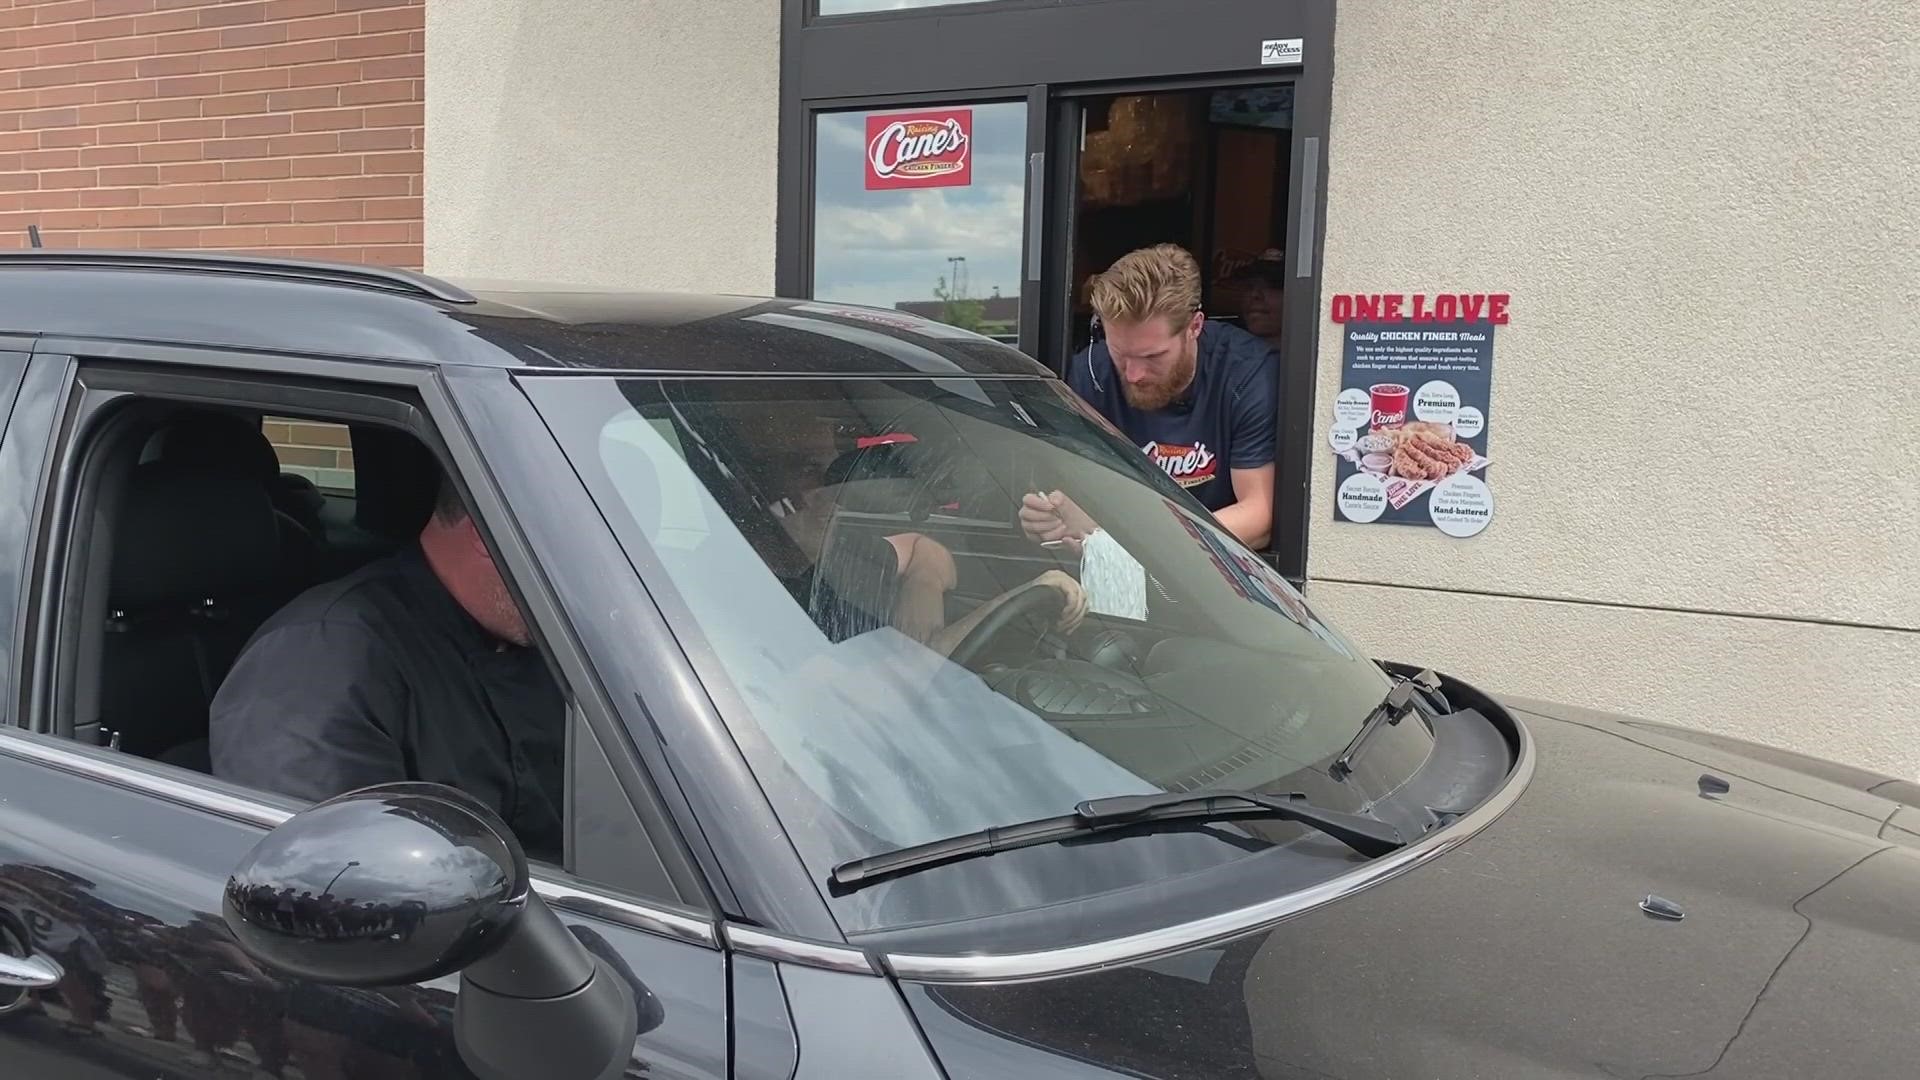 Fresh off a Stanley Cup victory, Landeskog was celebrating with fans by dishing out chicken fingers Wednesday afternoon at Raising Cane's.